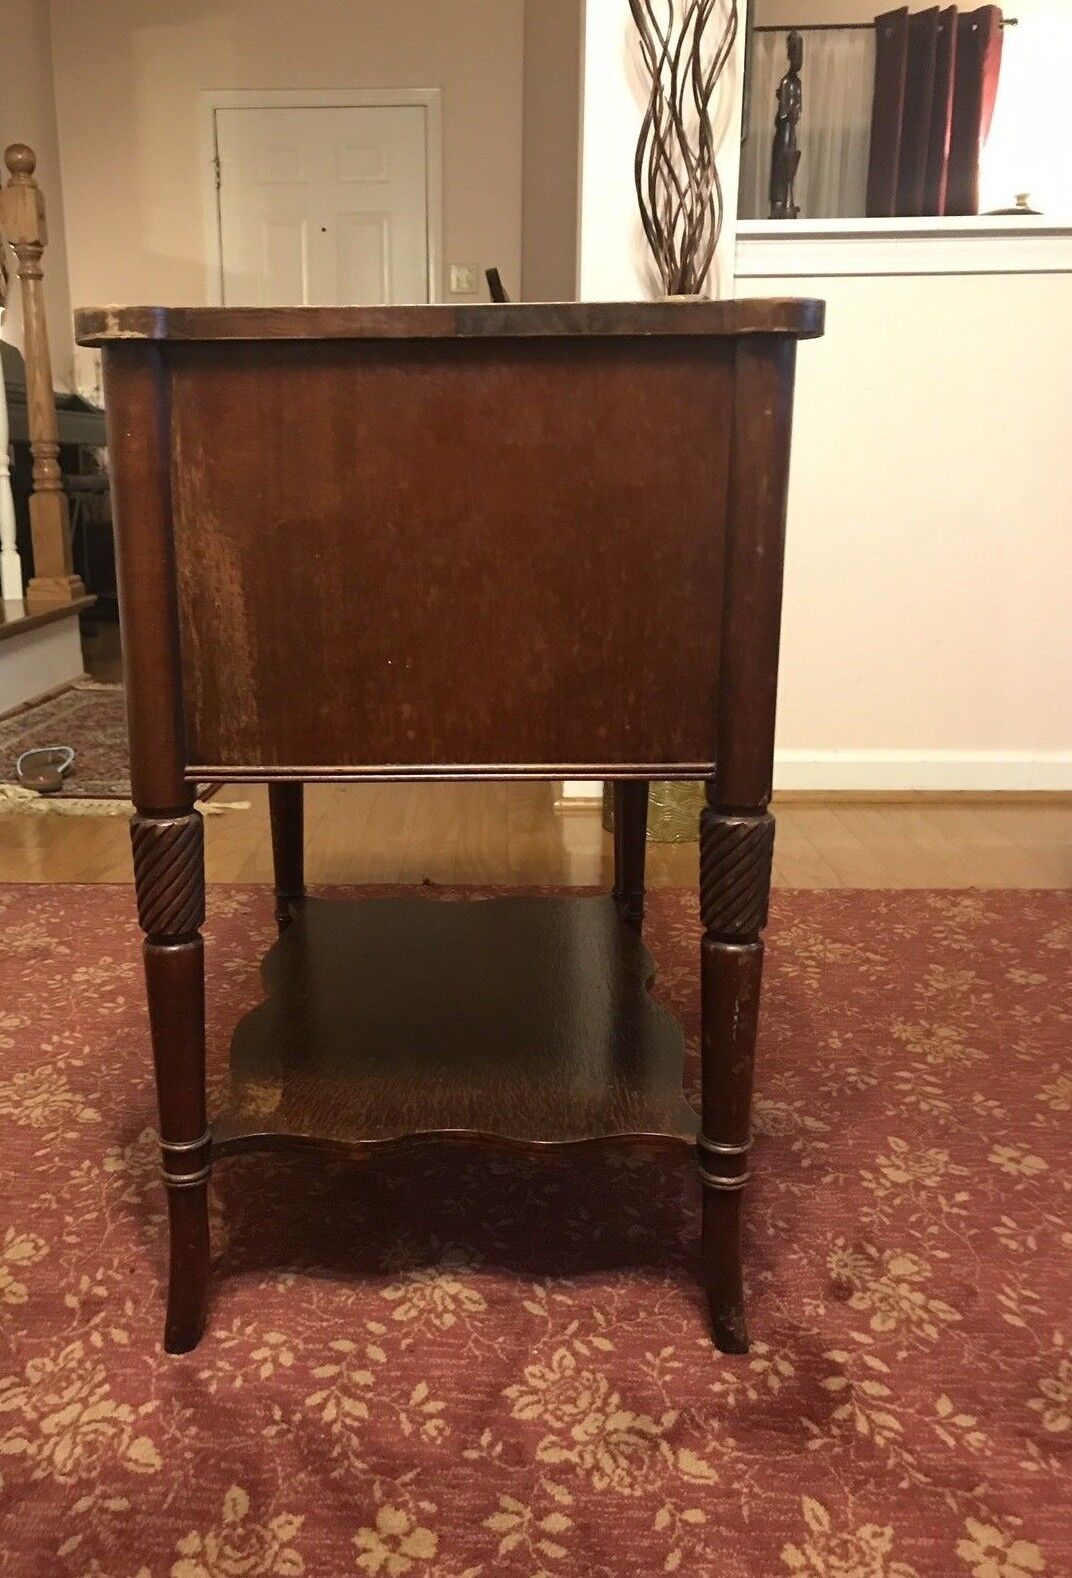 Antique Mid Century Chinese end table chippendale Fretwork w/ Drawer Shelf #6095 Chinese end table chippendale - фотография #6